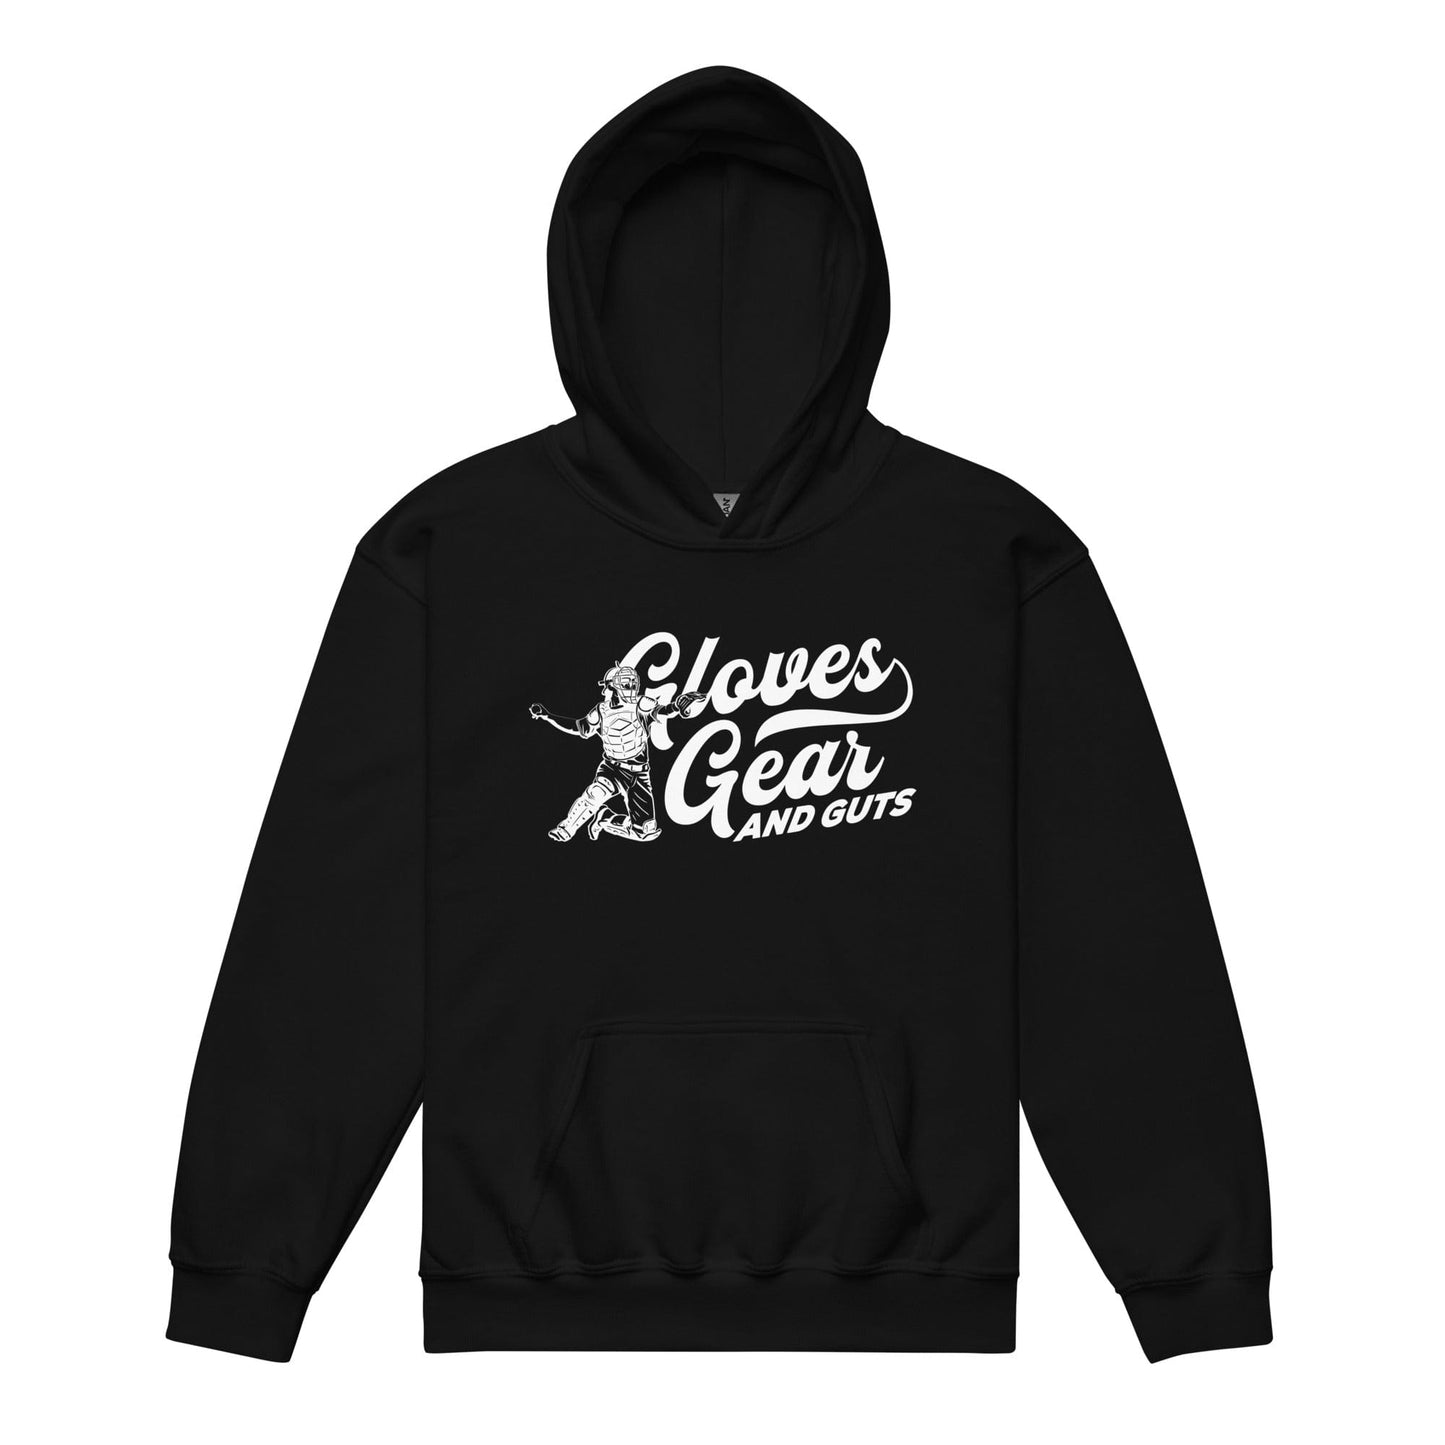 Gloves Gear And Guts - Youth Hoodie